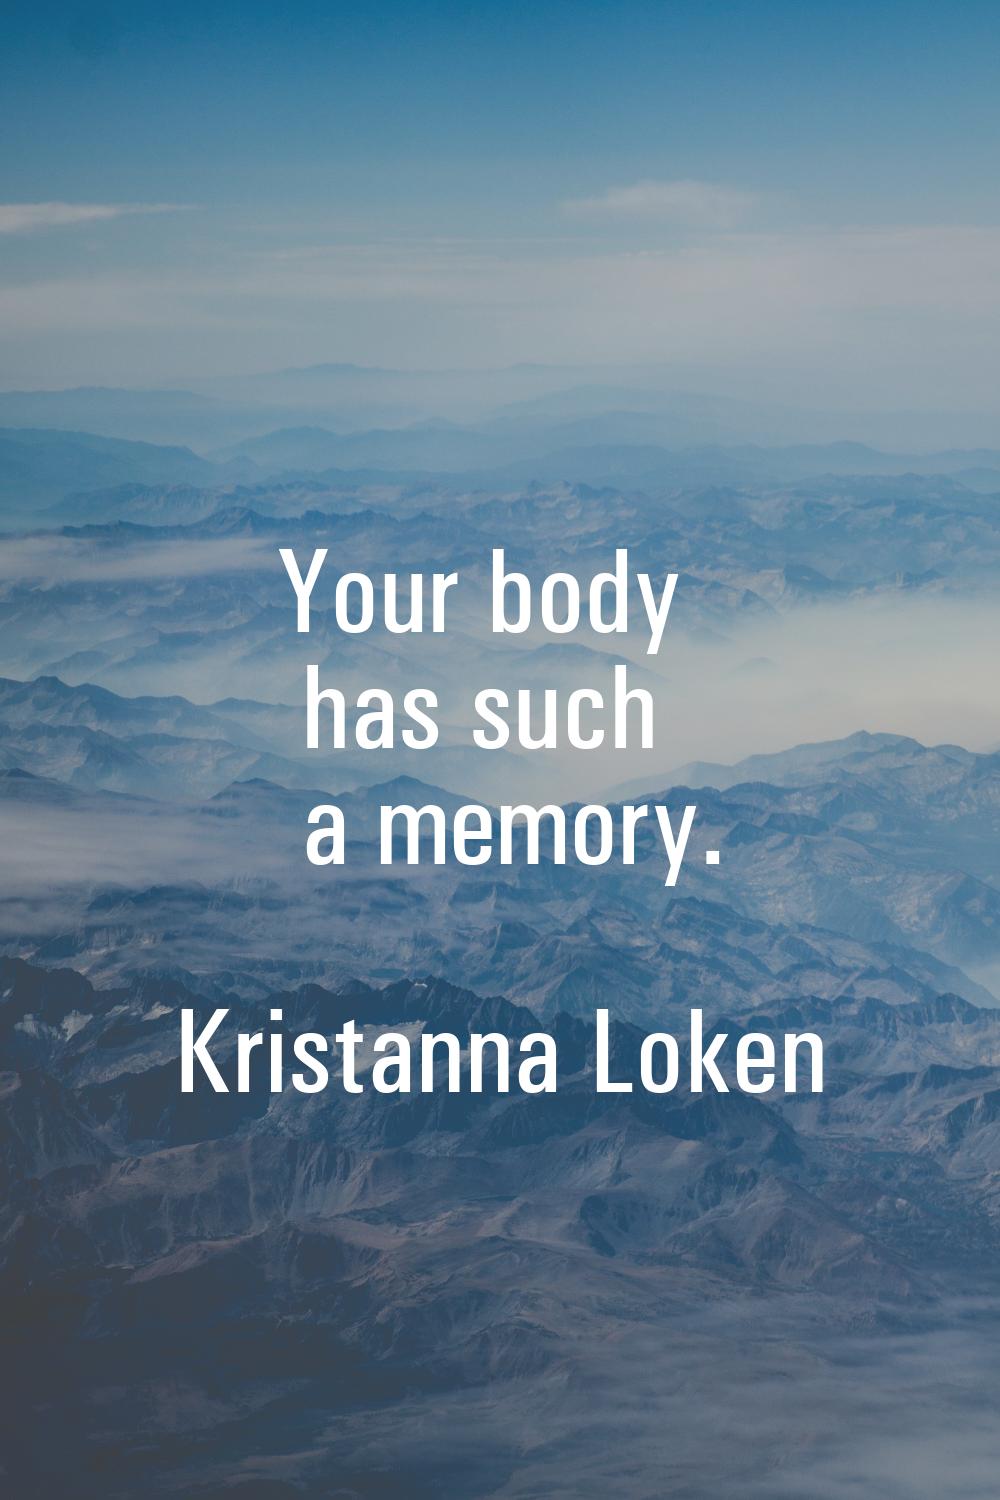 Your body has such a memory.